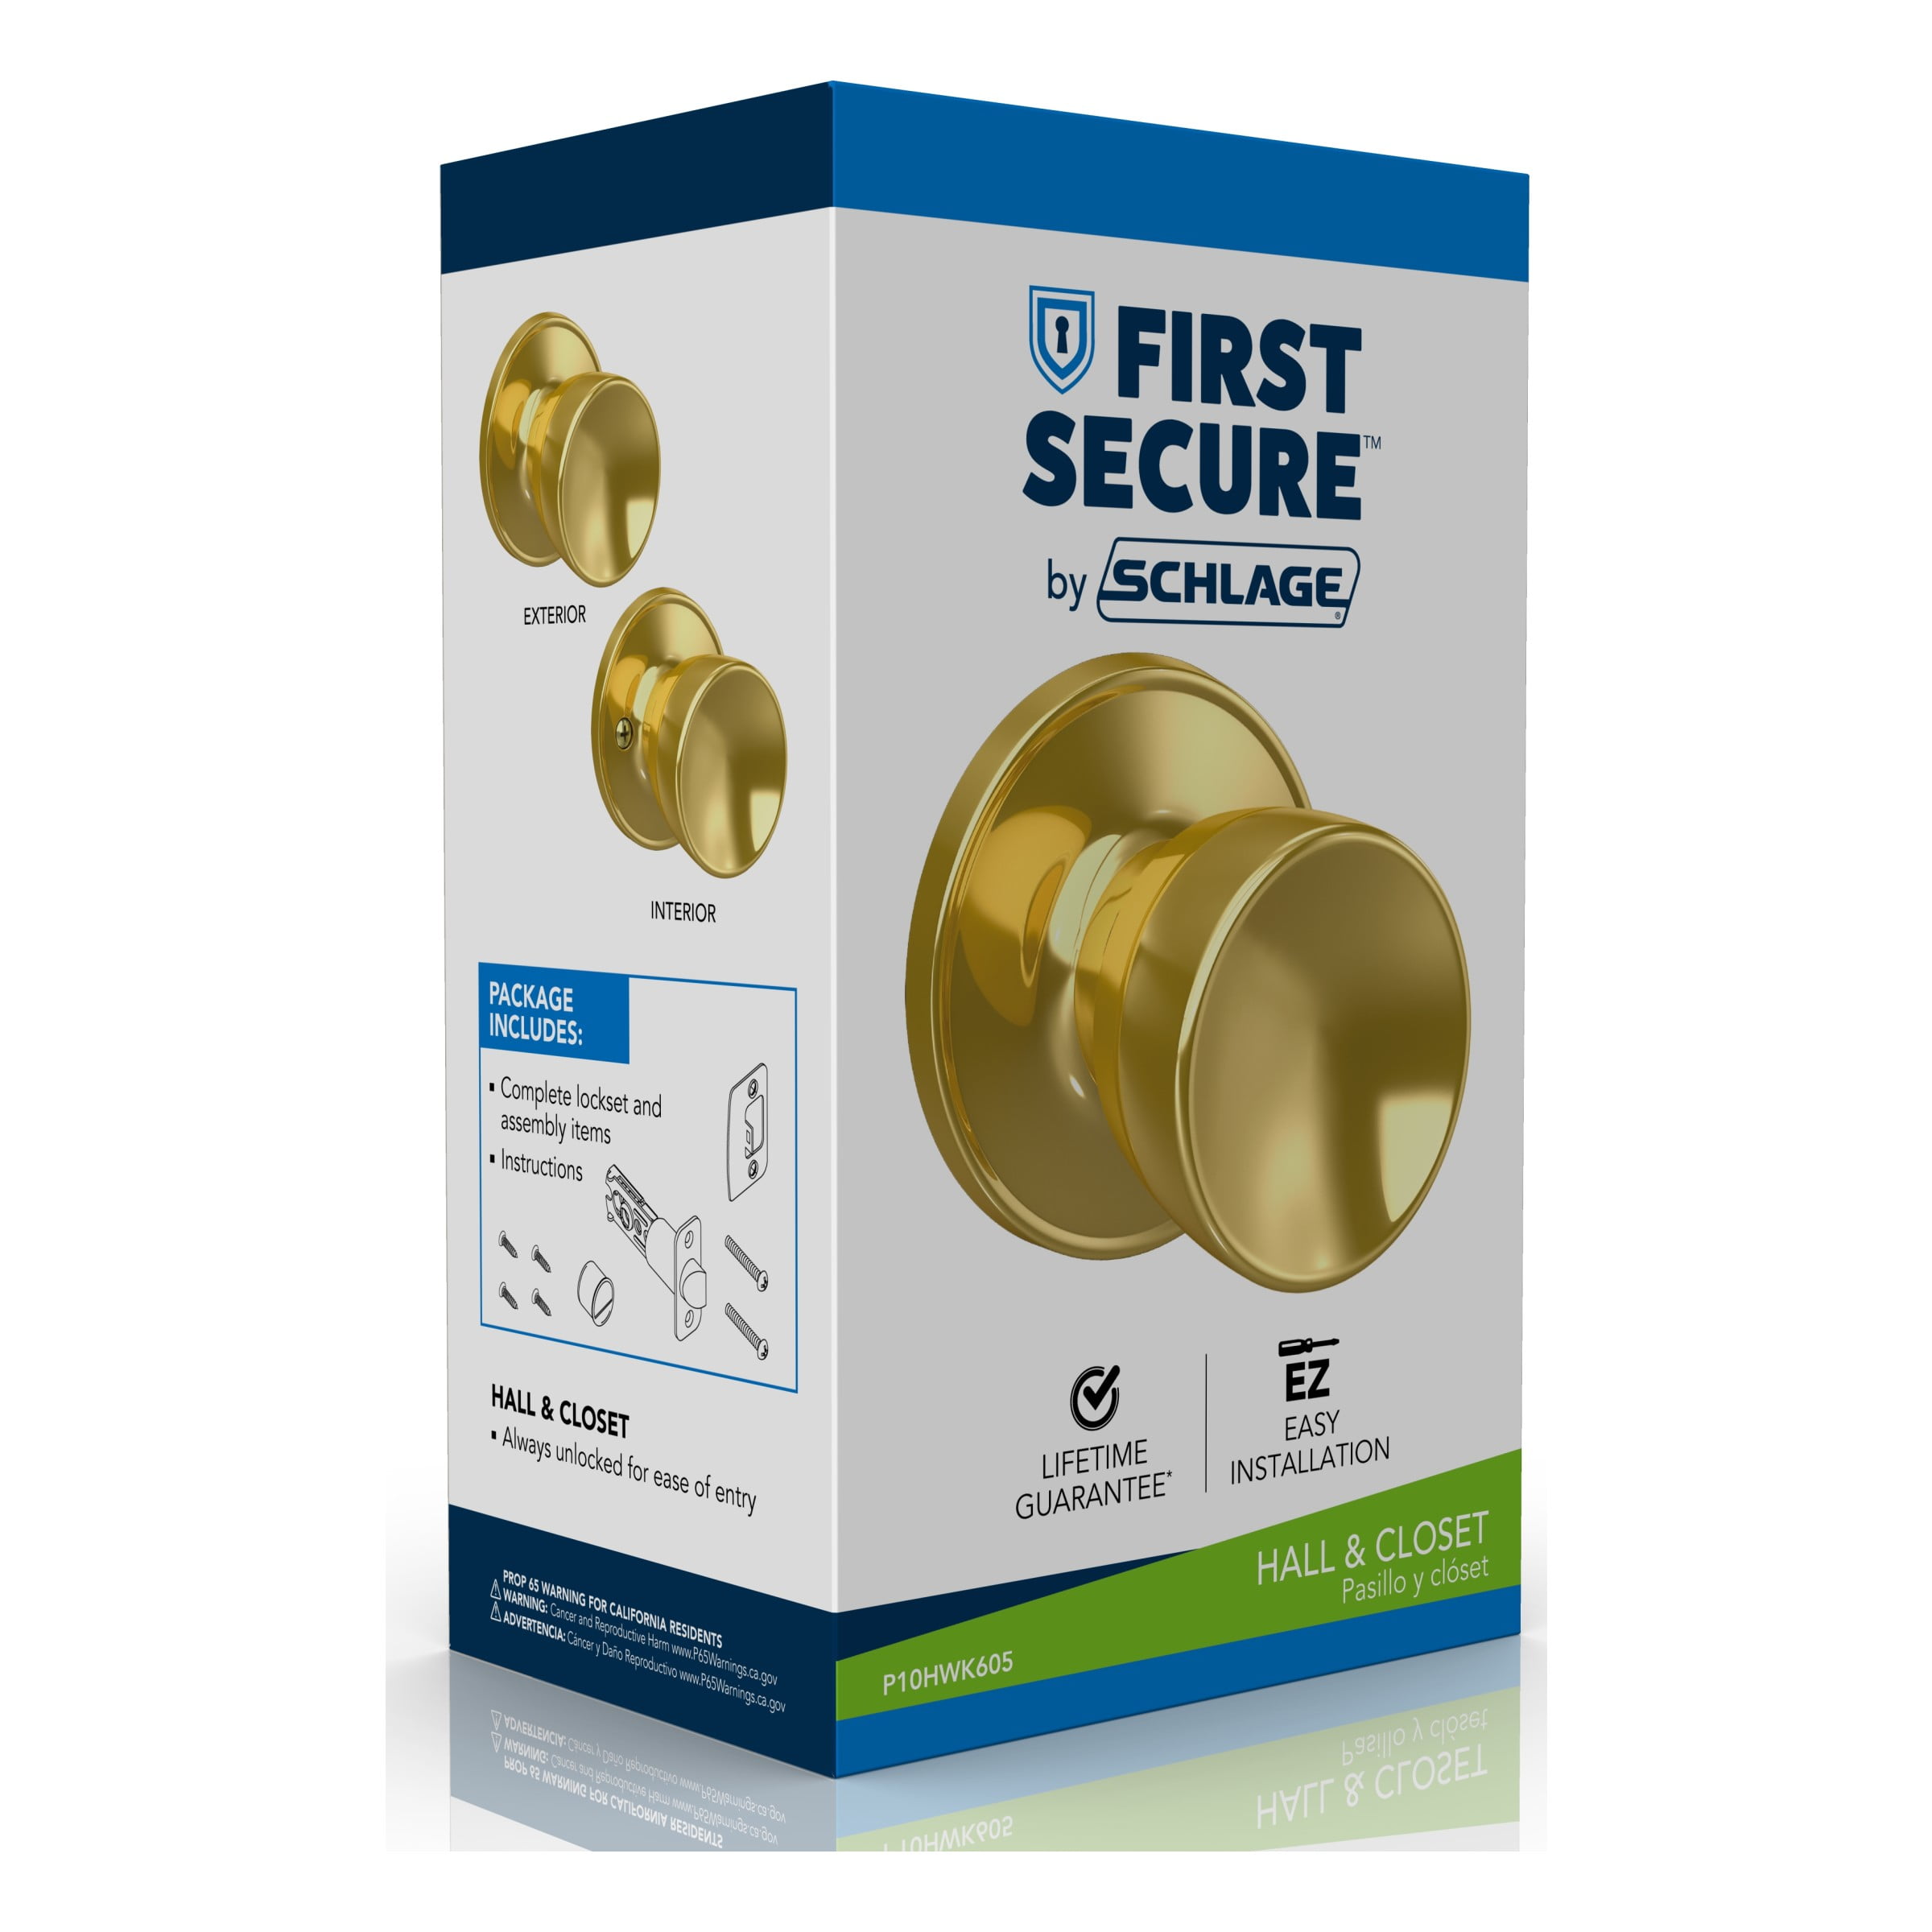 First Secure by Schlage Hawkins Knob Hall and Closet Lock in Antique Brass